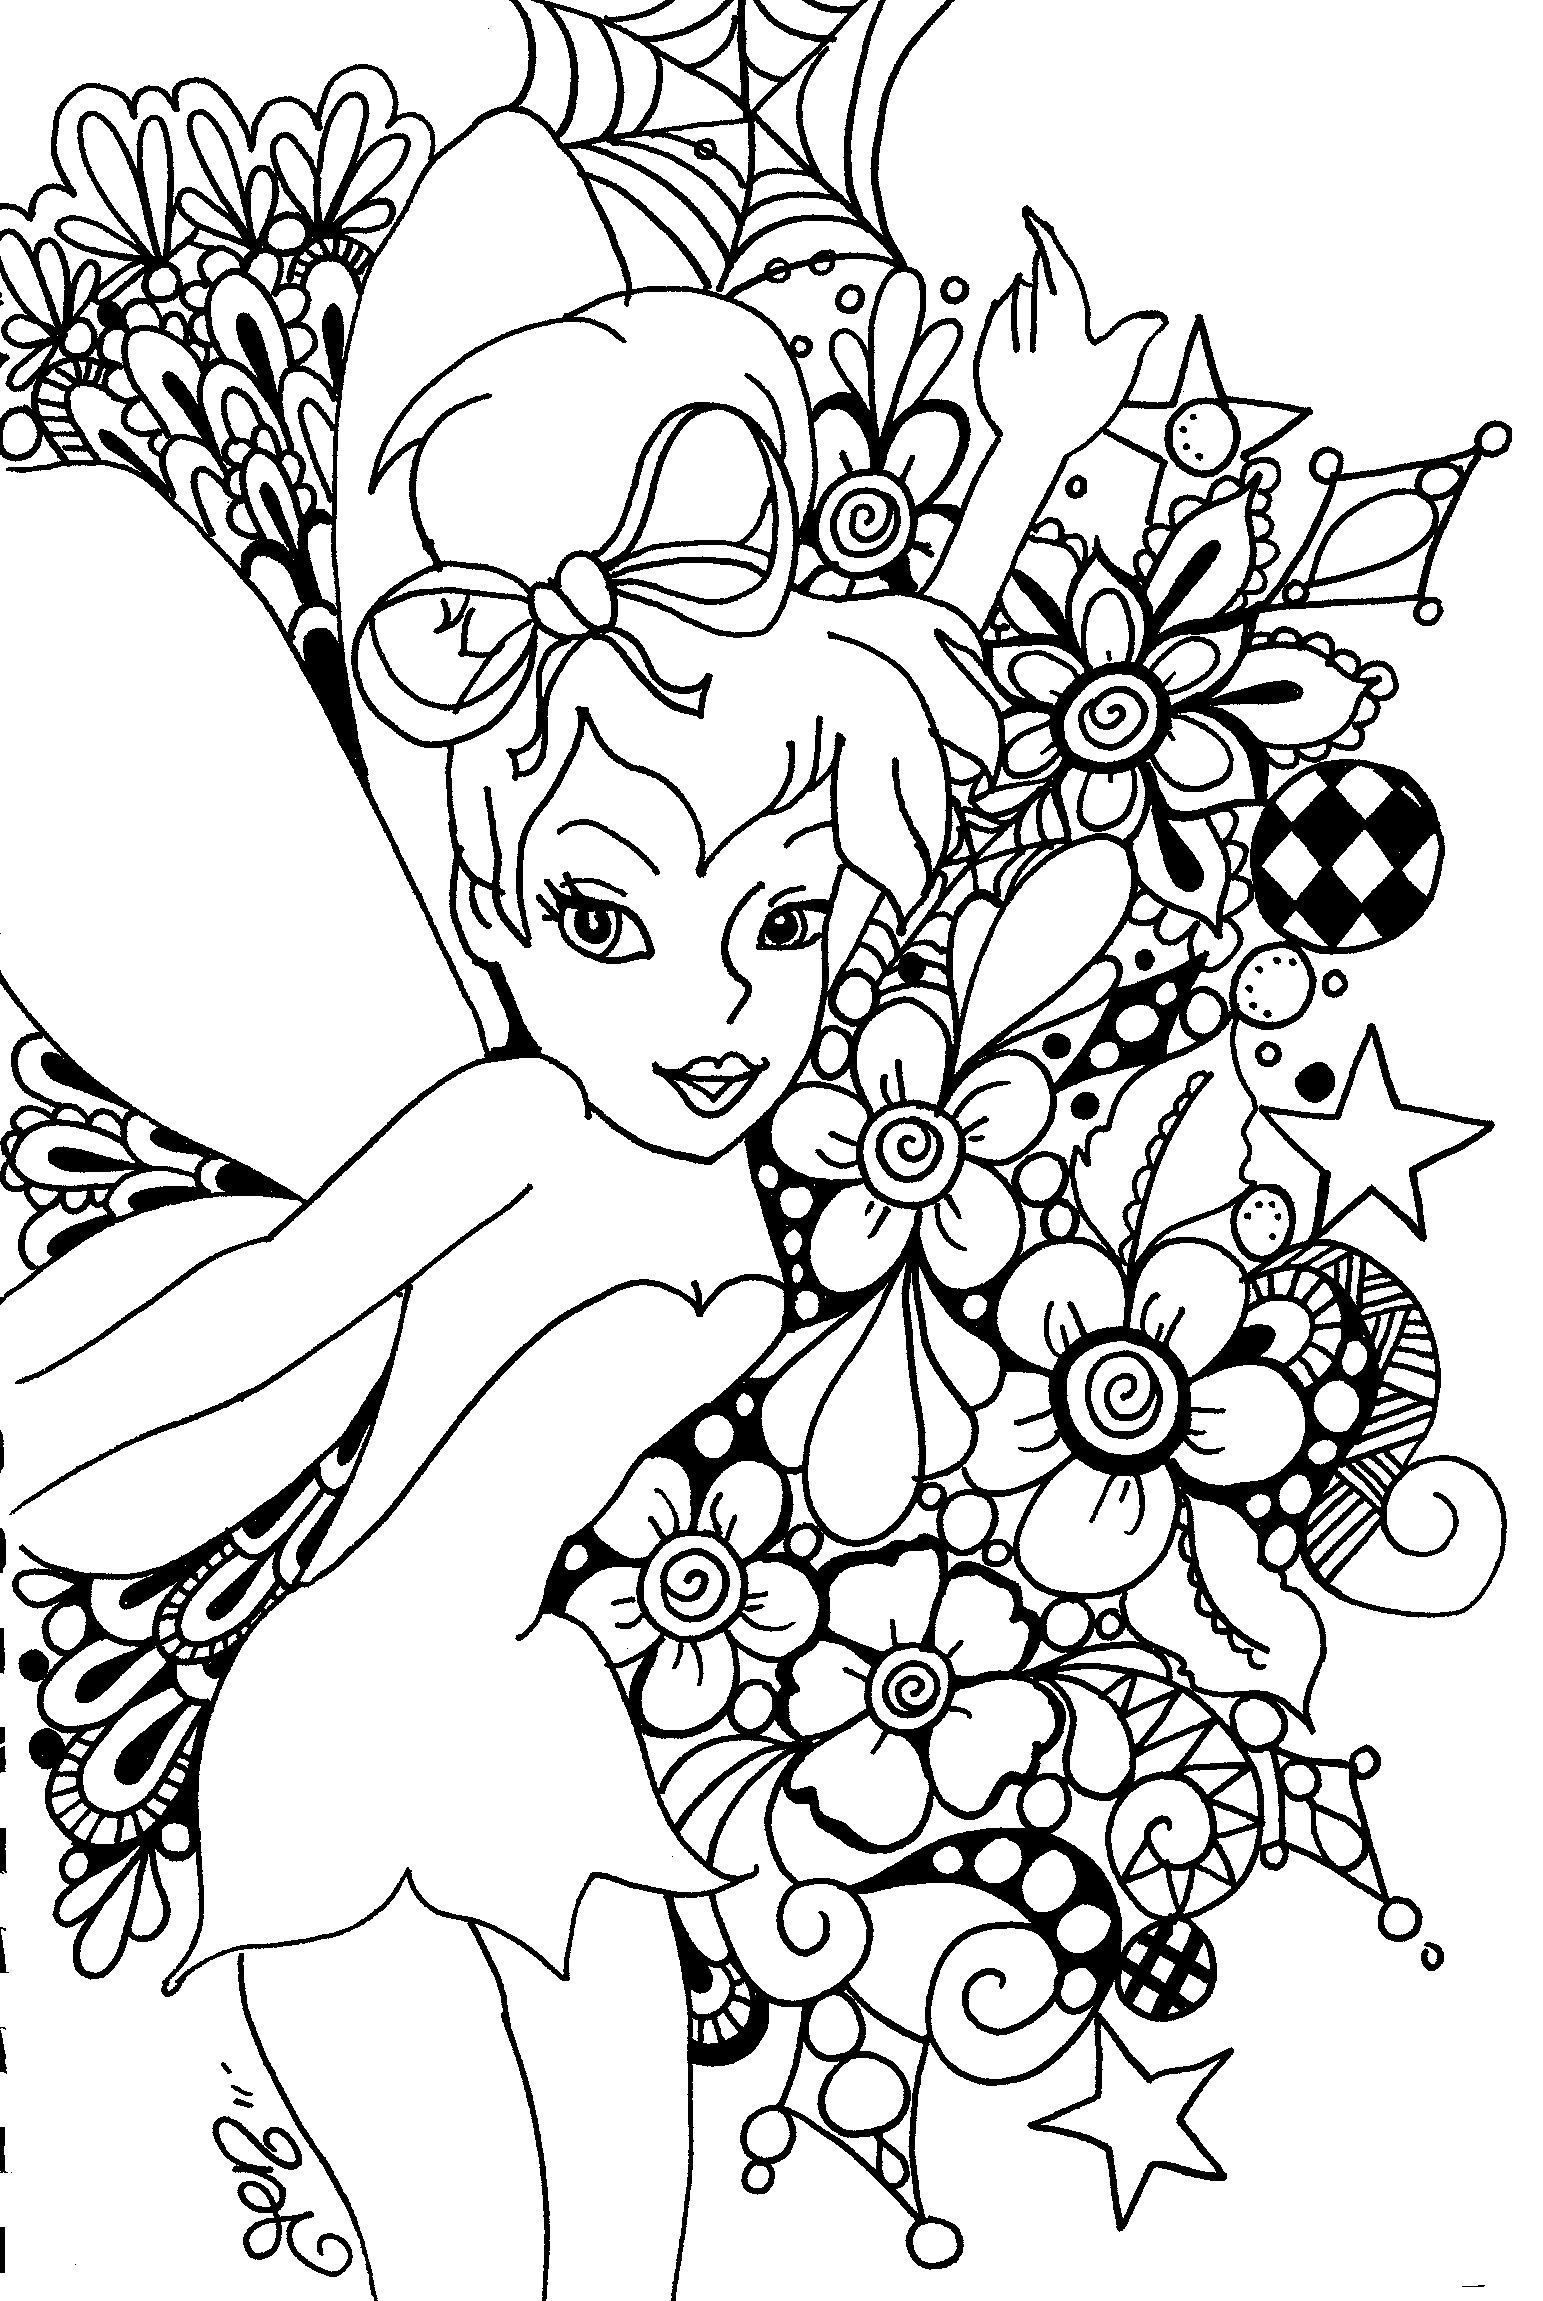 Free Printable Tinkerbell Coloring Pages For Kids | Art!! | Fairy - Tinkerbell Coloring Pages Printable Free